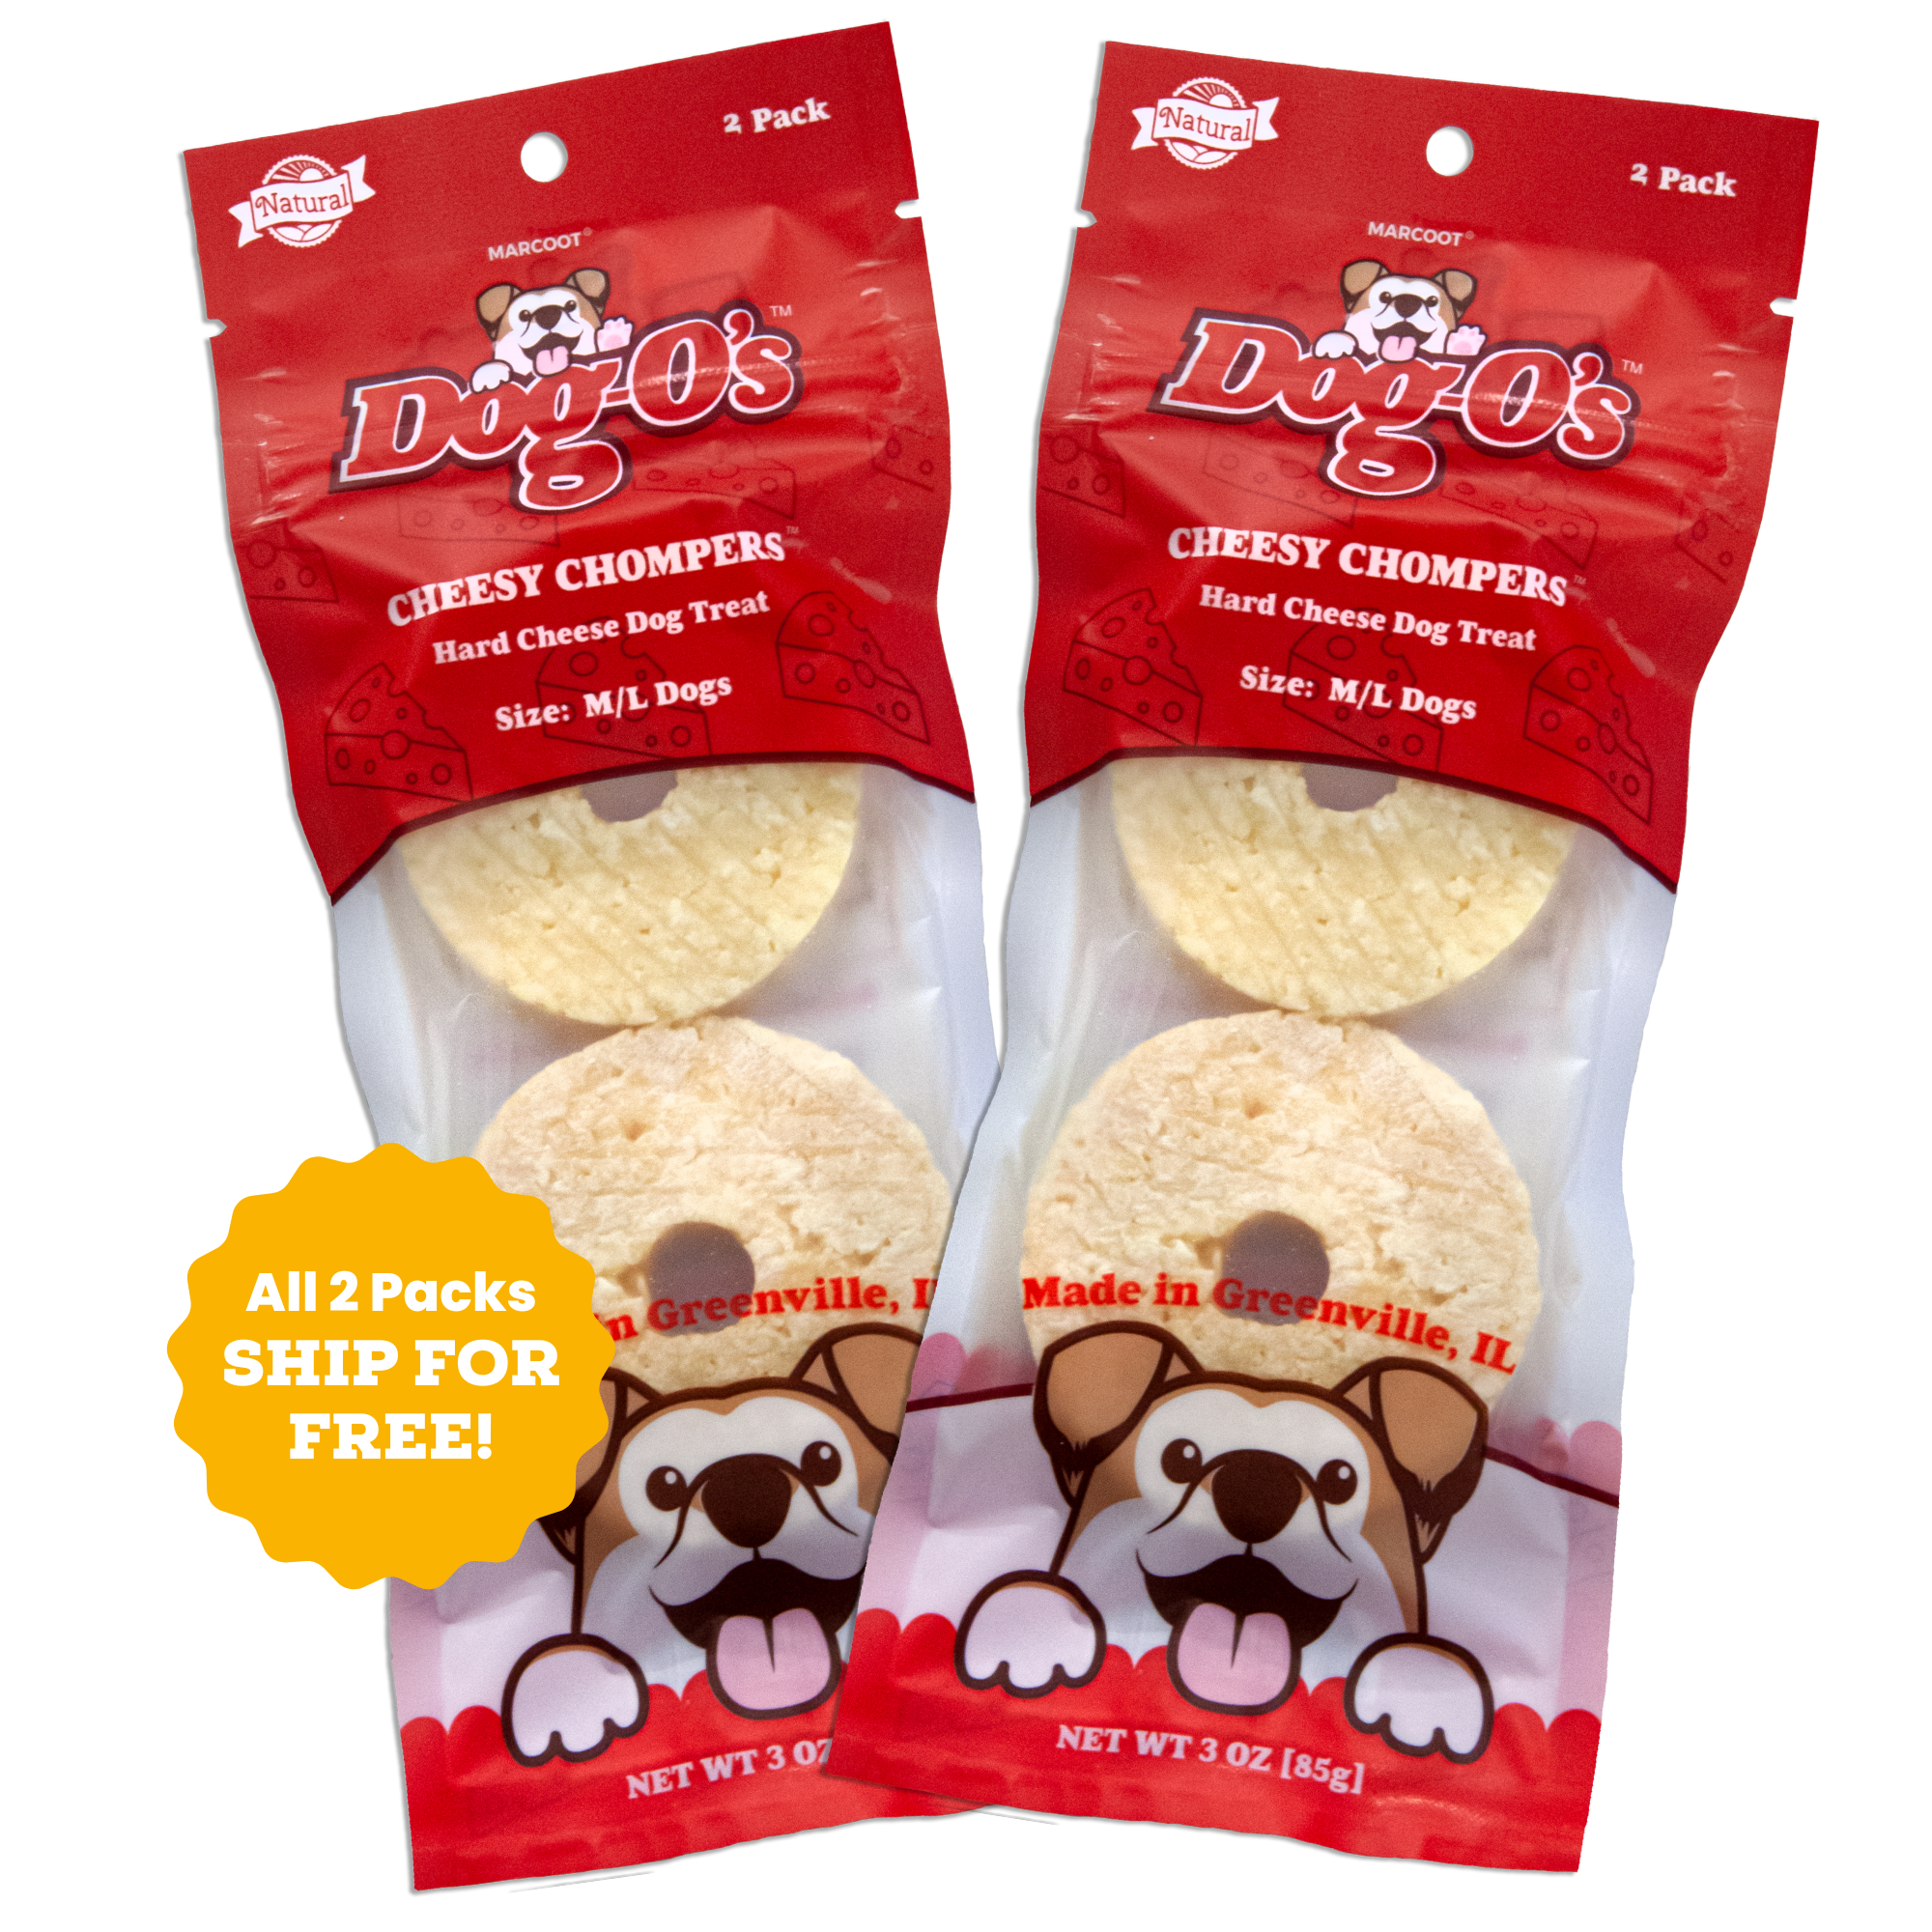 Dog-O’s Cheesy Chompers® with Free Shipping